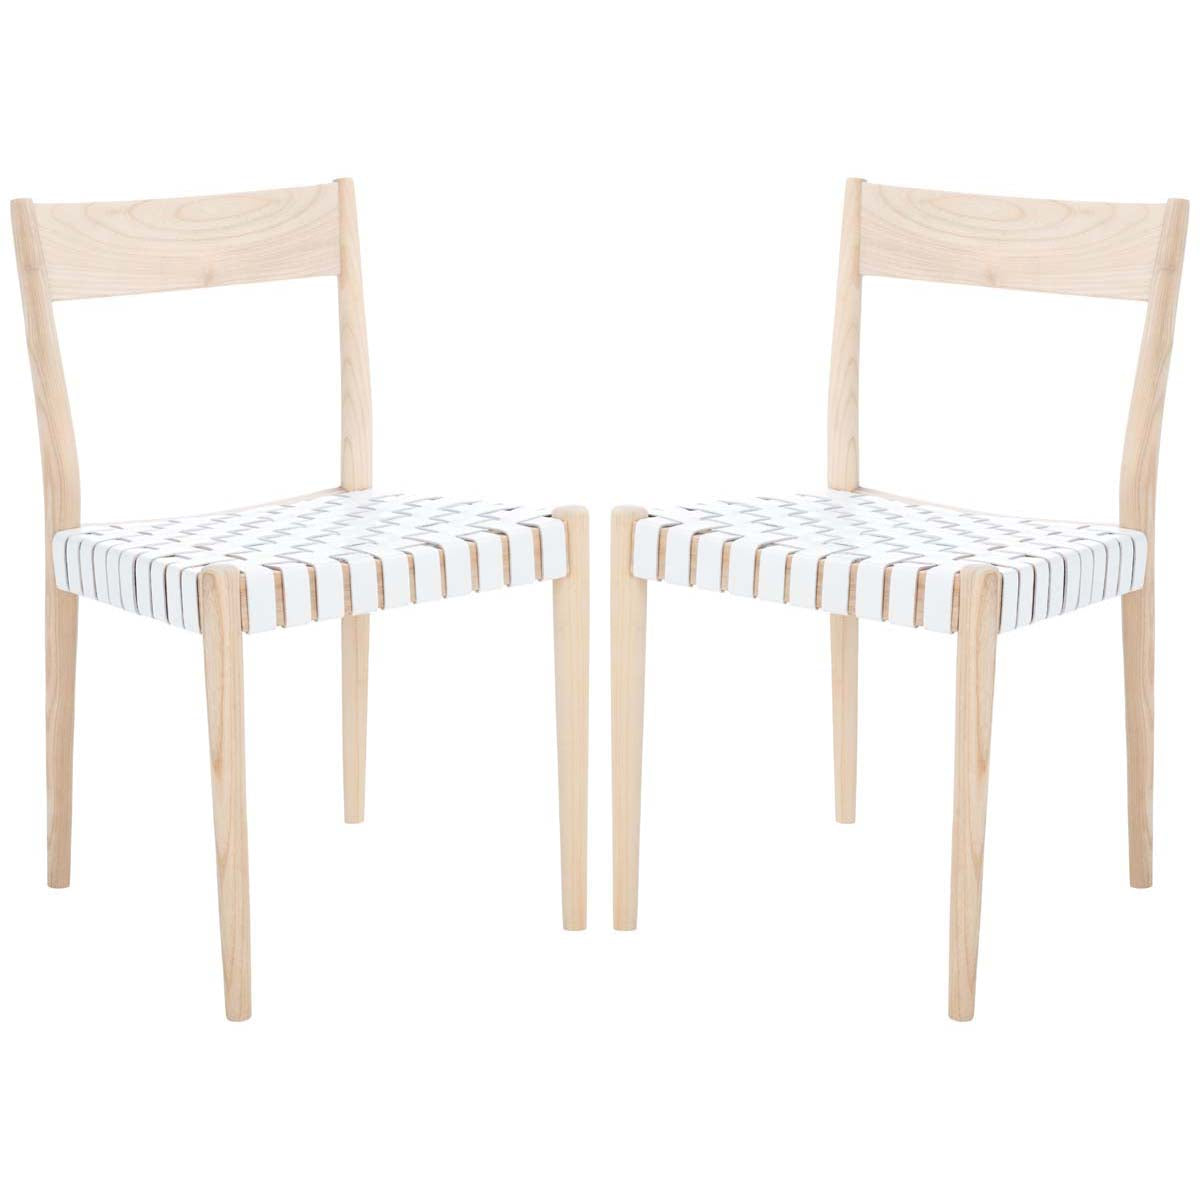 Safavieh Eluned Leather Dining Chair , DCH1201 - White / Natural (Set of 2)